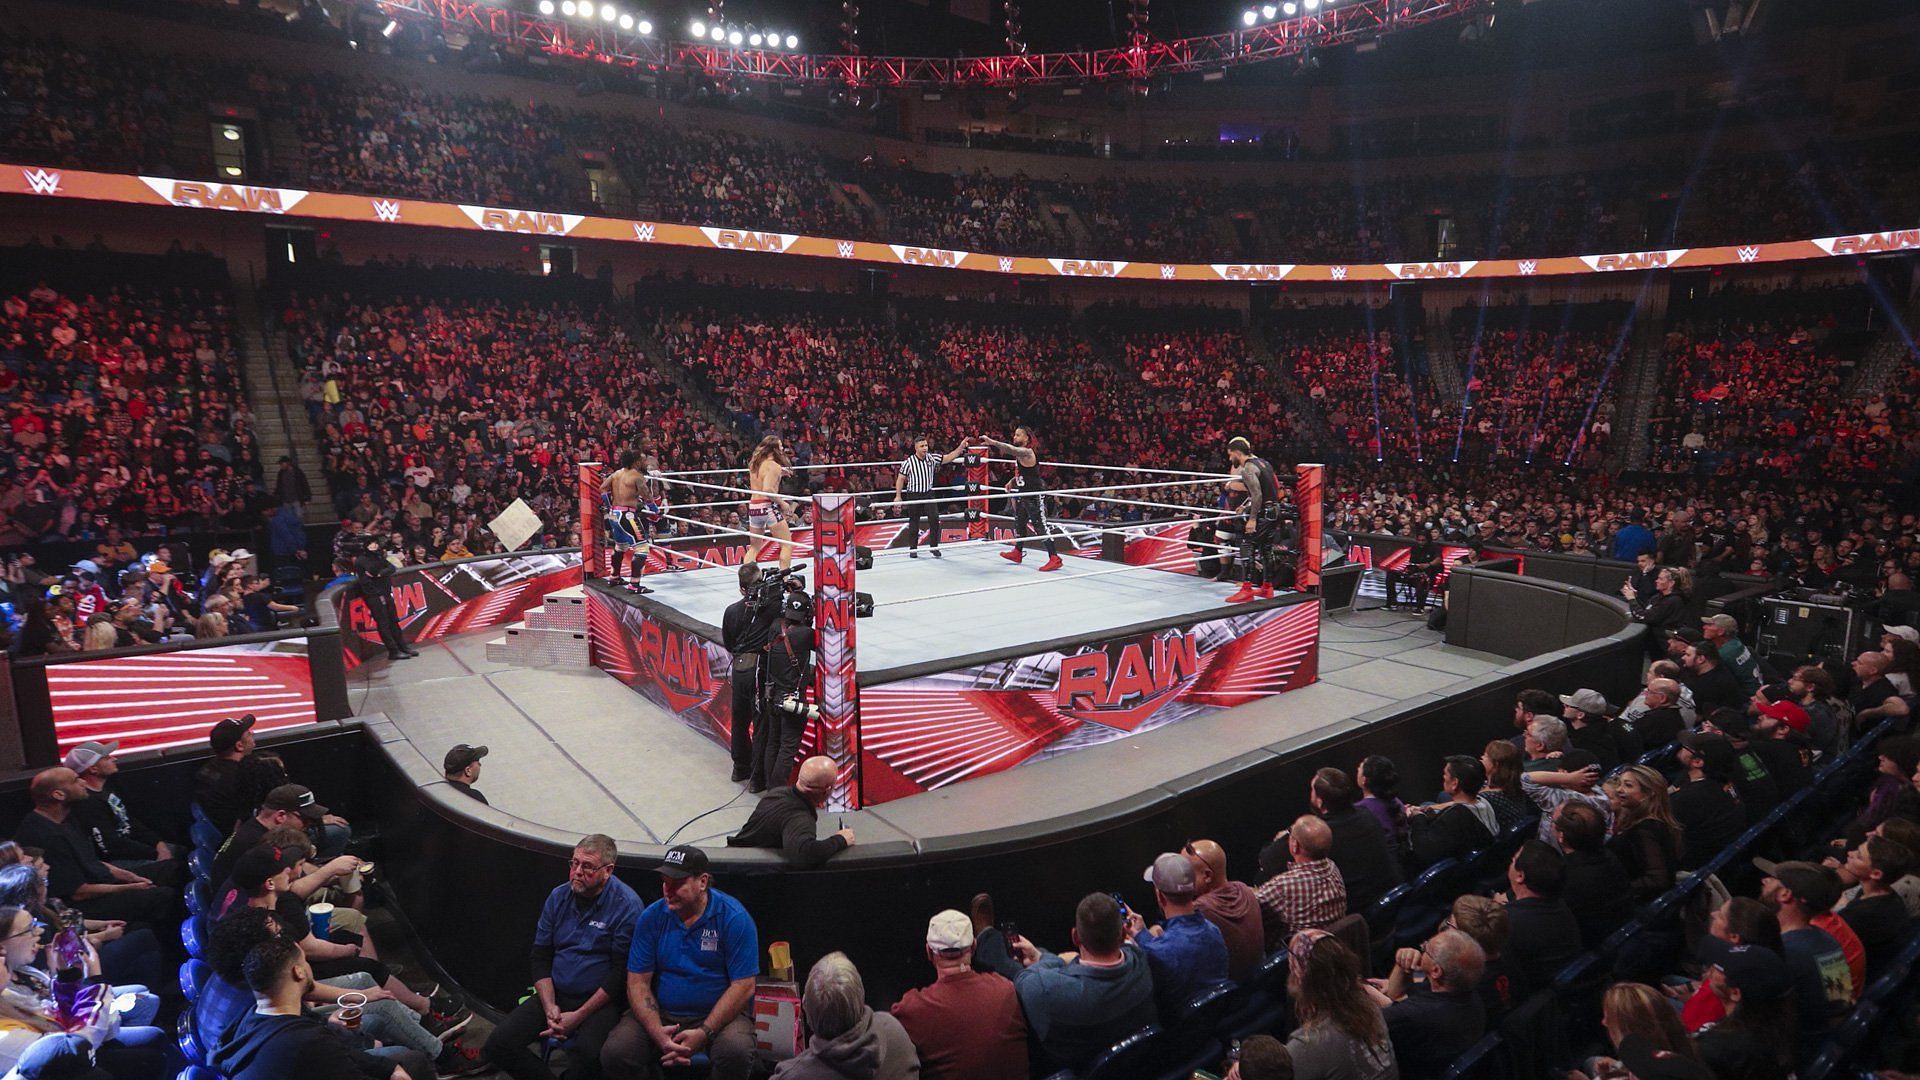 The WWE RAW stage and ring on display